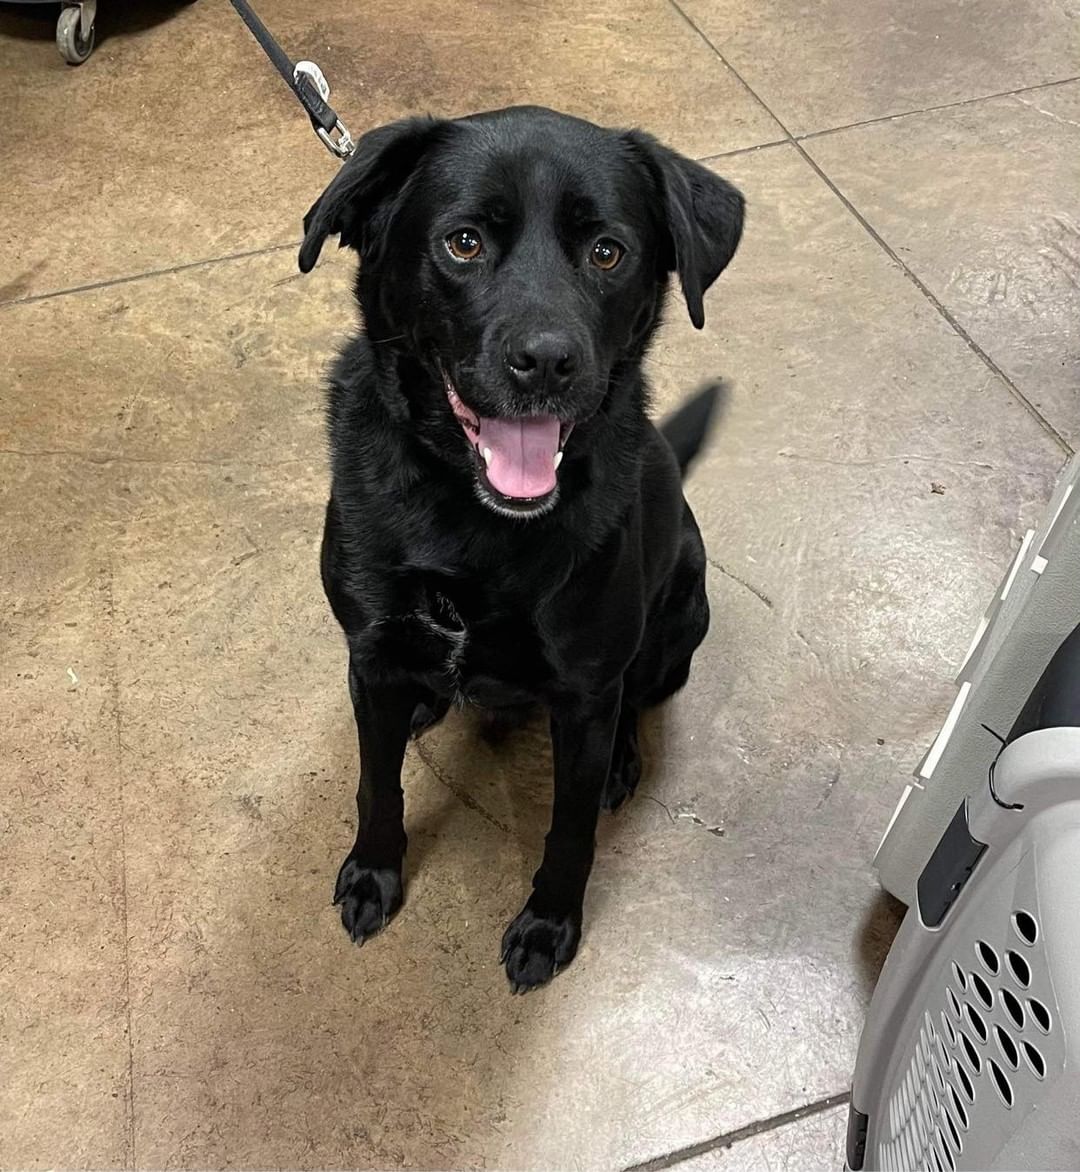 Lab lovers: this gal’s for you! 😍

Ann is a 4 year old, 65lbs, labby mix lady. 🧬 This poor girl found her way to us after being abandoned by her owner. 💔 Naturally, she’s a bit shaken from the sudden change. What she doesn’t know is only good things are in store for her from here on out! ✅ 

In her foster home Ann is doing well with house + crate training, and she knows how to walk on leash. 🐕‍🦺 A bit reserved, she opens up more and more each day, showing her affectionate, cuddly side. 🥰 Based on her personality she could join a home with respectful kids 5+, other calm dogs, or savvy cats. 😼 Ann would love a fenced-in yard, however it is not a requirement. 

Her foster says, 💬 “Ann is the absolute sweetest thing and loves to stay by your side. She has run a bit hot-and-cold with this, sometimes wanting you and other times being wary. The more time passes, the more secure she feels, and the more she wants to cuddle! Patience is key with sweet Ann, but it is all absolutely worth it! Ann would love a home with a yard she can safely run around in. She is at her happiest outside off a leash. Ann has lived in her foster home with three other dogs, all of whom are usually calm. Ann has been nervous with them and is only recently started to open up with them. I think she’d love a playmate in her forever home as she does show signs of wanting to play.”

If you think Ann is the lady you’ve been longing for, head to www.browndogcoalition.com and apply to adopt!

<a target='_blank' href='https://www.instagram.com/explore/tags/labmix/'>#labmix</a> <a target='_blank' href='https://www.instagram.com/explore/tags/labstagram/'>#labstagram</a> <a target='_blank' href='https://www.instagram.com/explore/tags/adoptabledogs/'>#adoptabledogs</a> <a target='_blank' href='https://www.instagram.com/explore/tags/dogsofnewengland/'>#dogsofnewengland</a> <a target='_blank' href='https://www.instagram.com/explore/tags/browndog/'>#browndog</a>